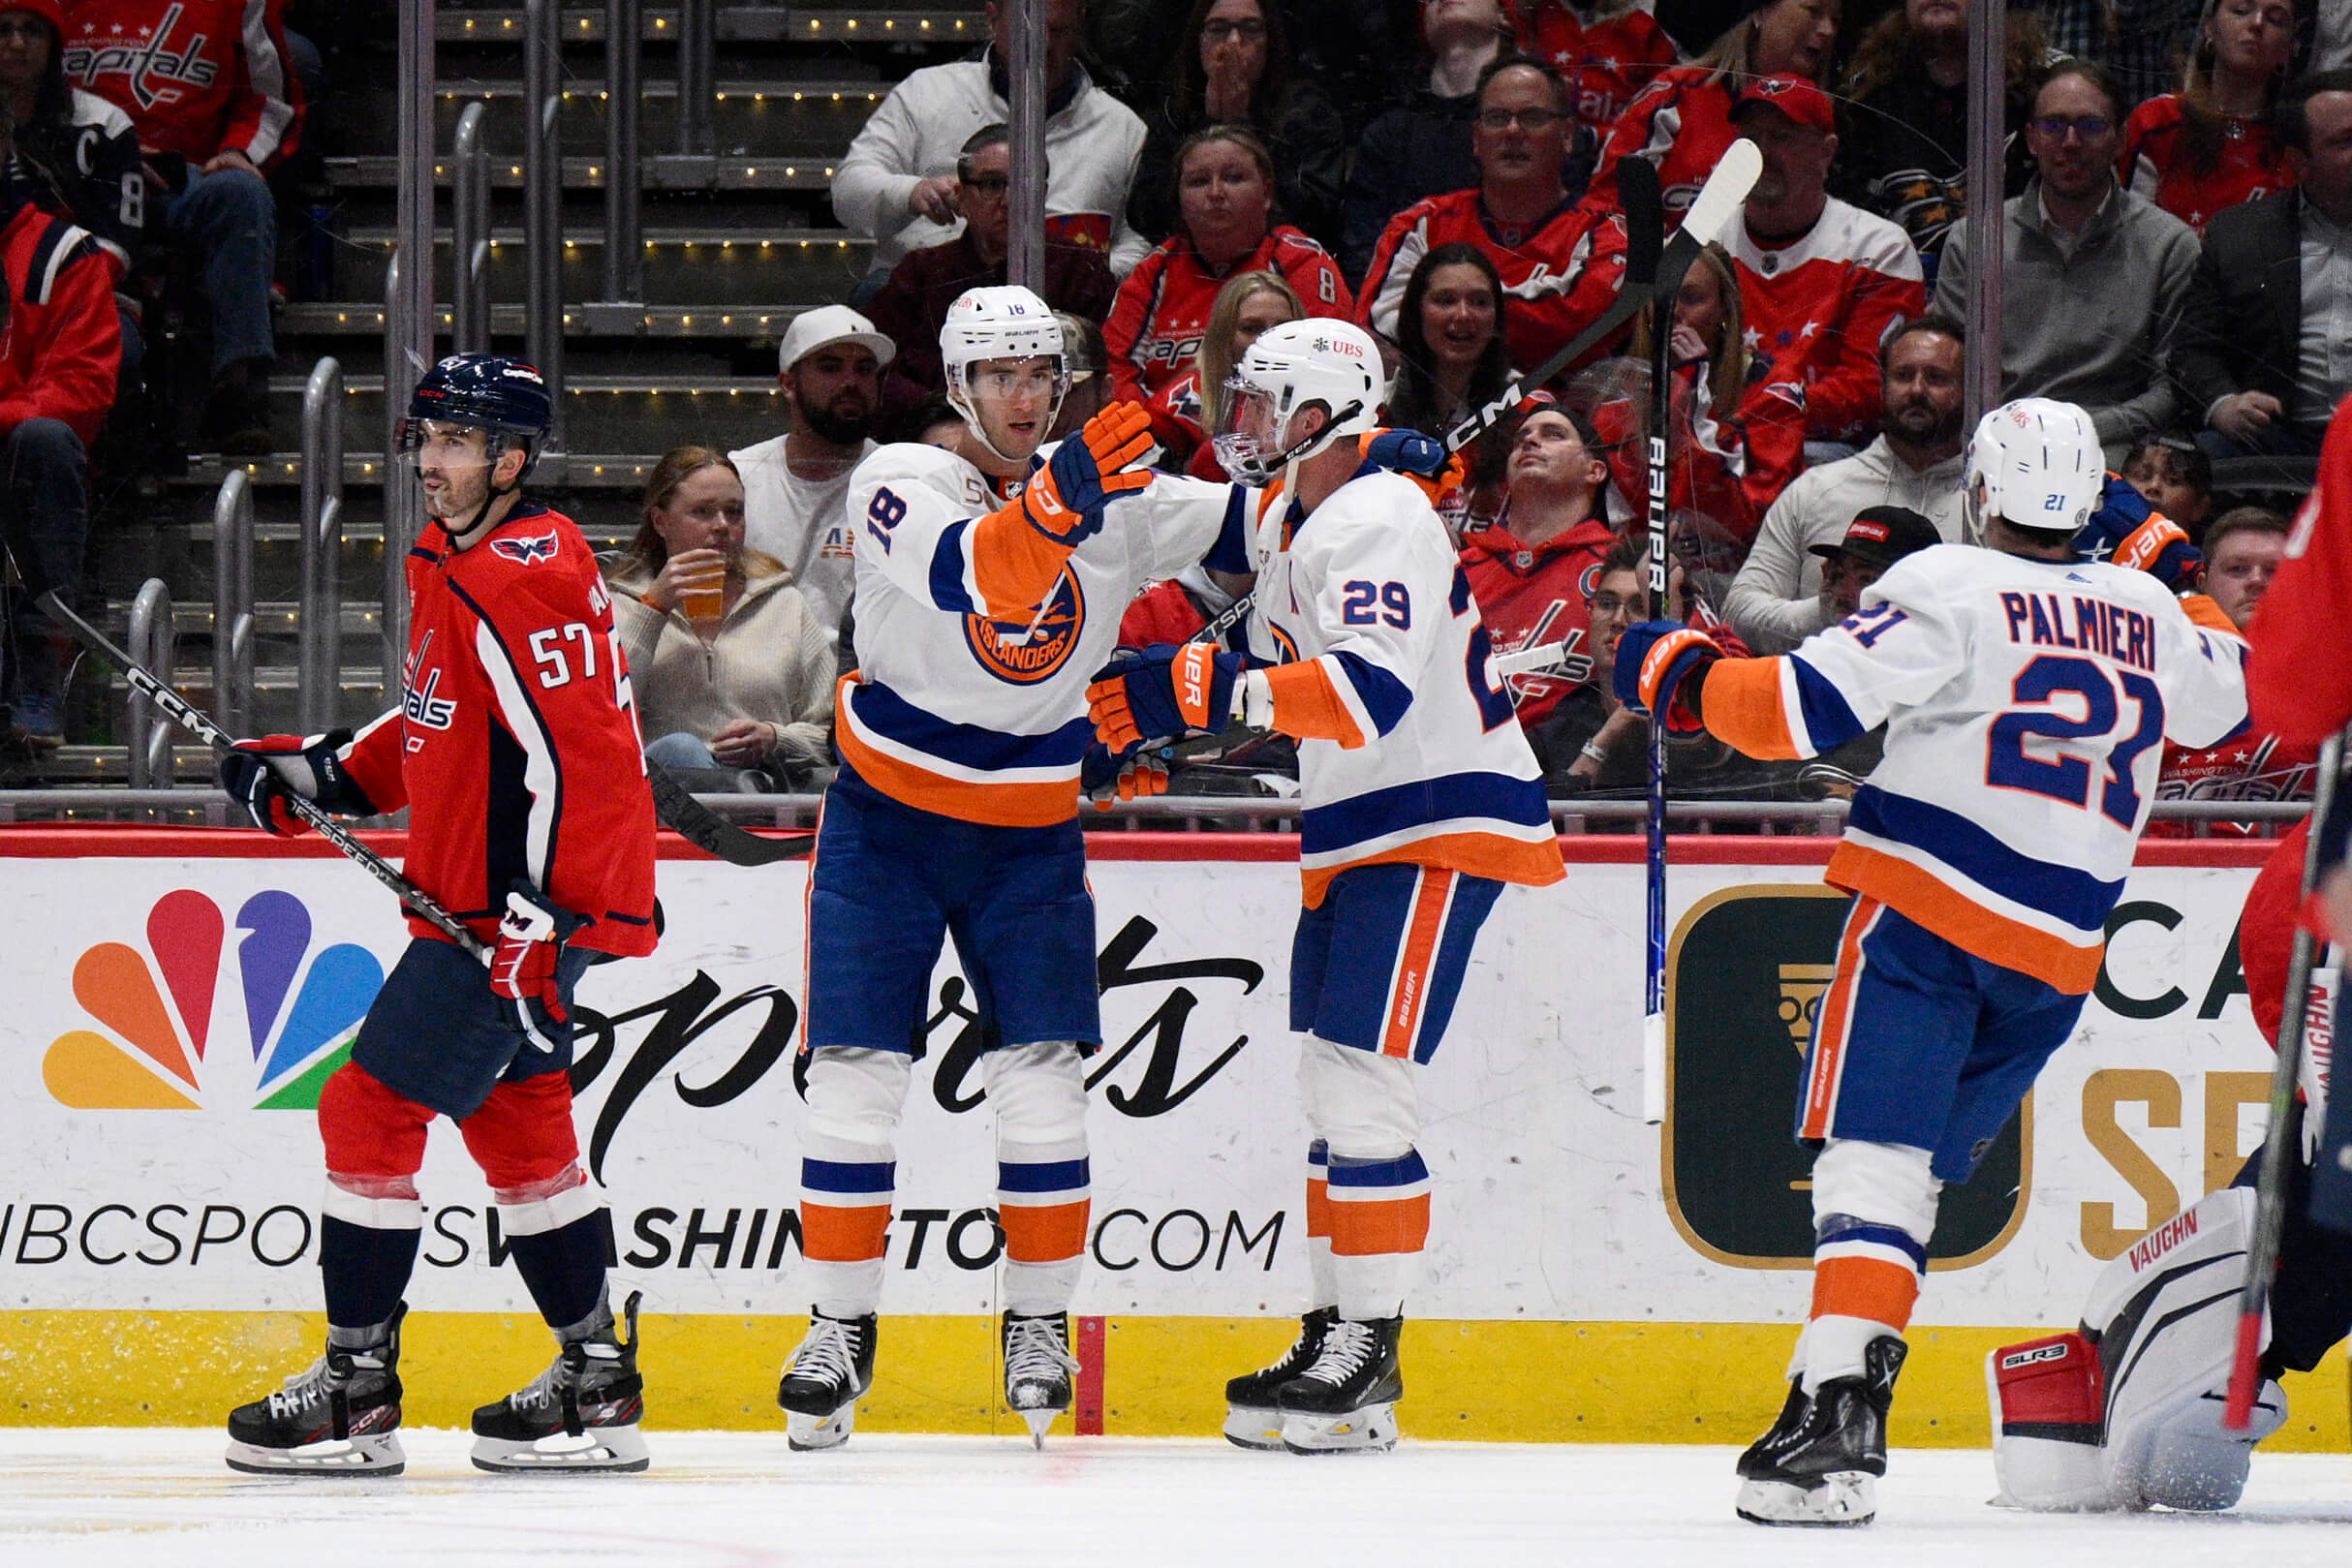 Brock Nelson's OT goal lifts Islanders past Penguins - The Rink Live   Comprehensive coverage of youth, junior, high school and college hockey